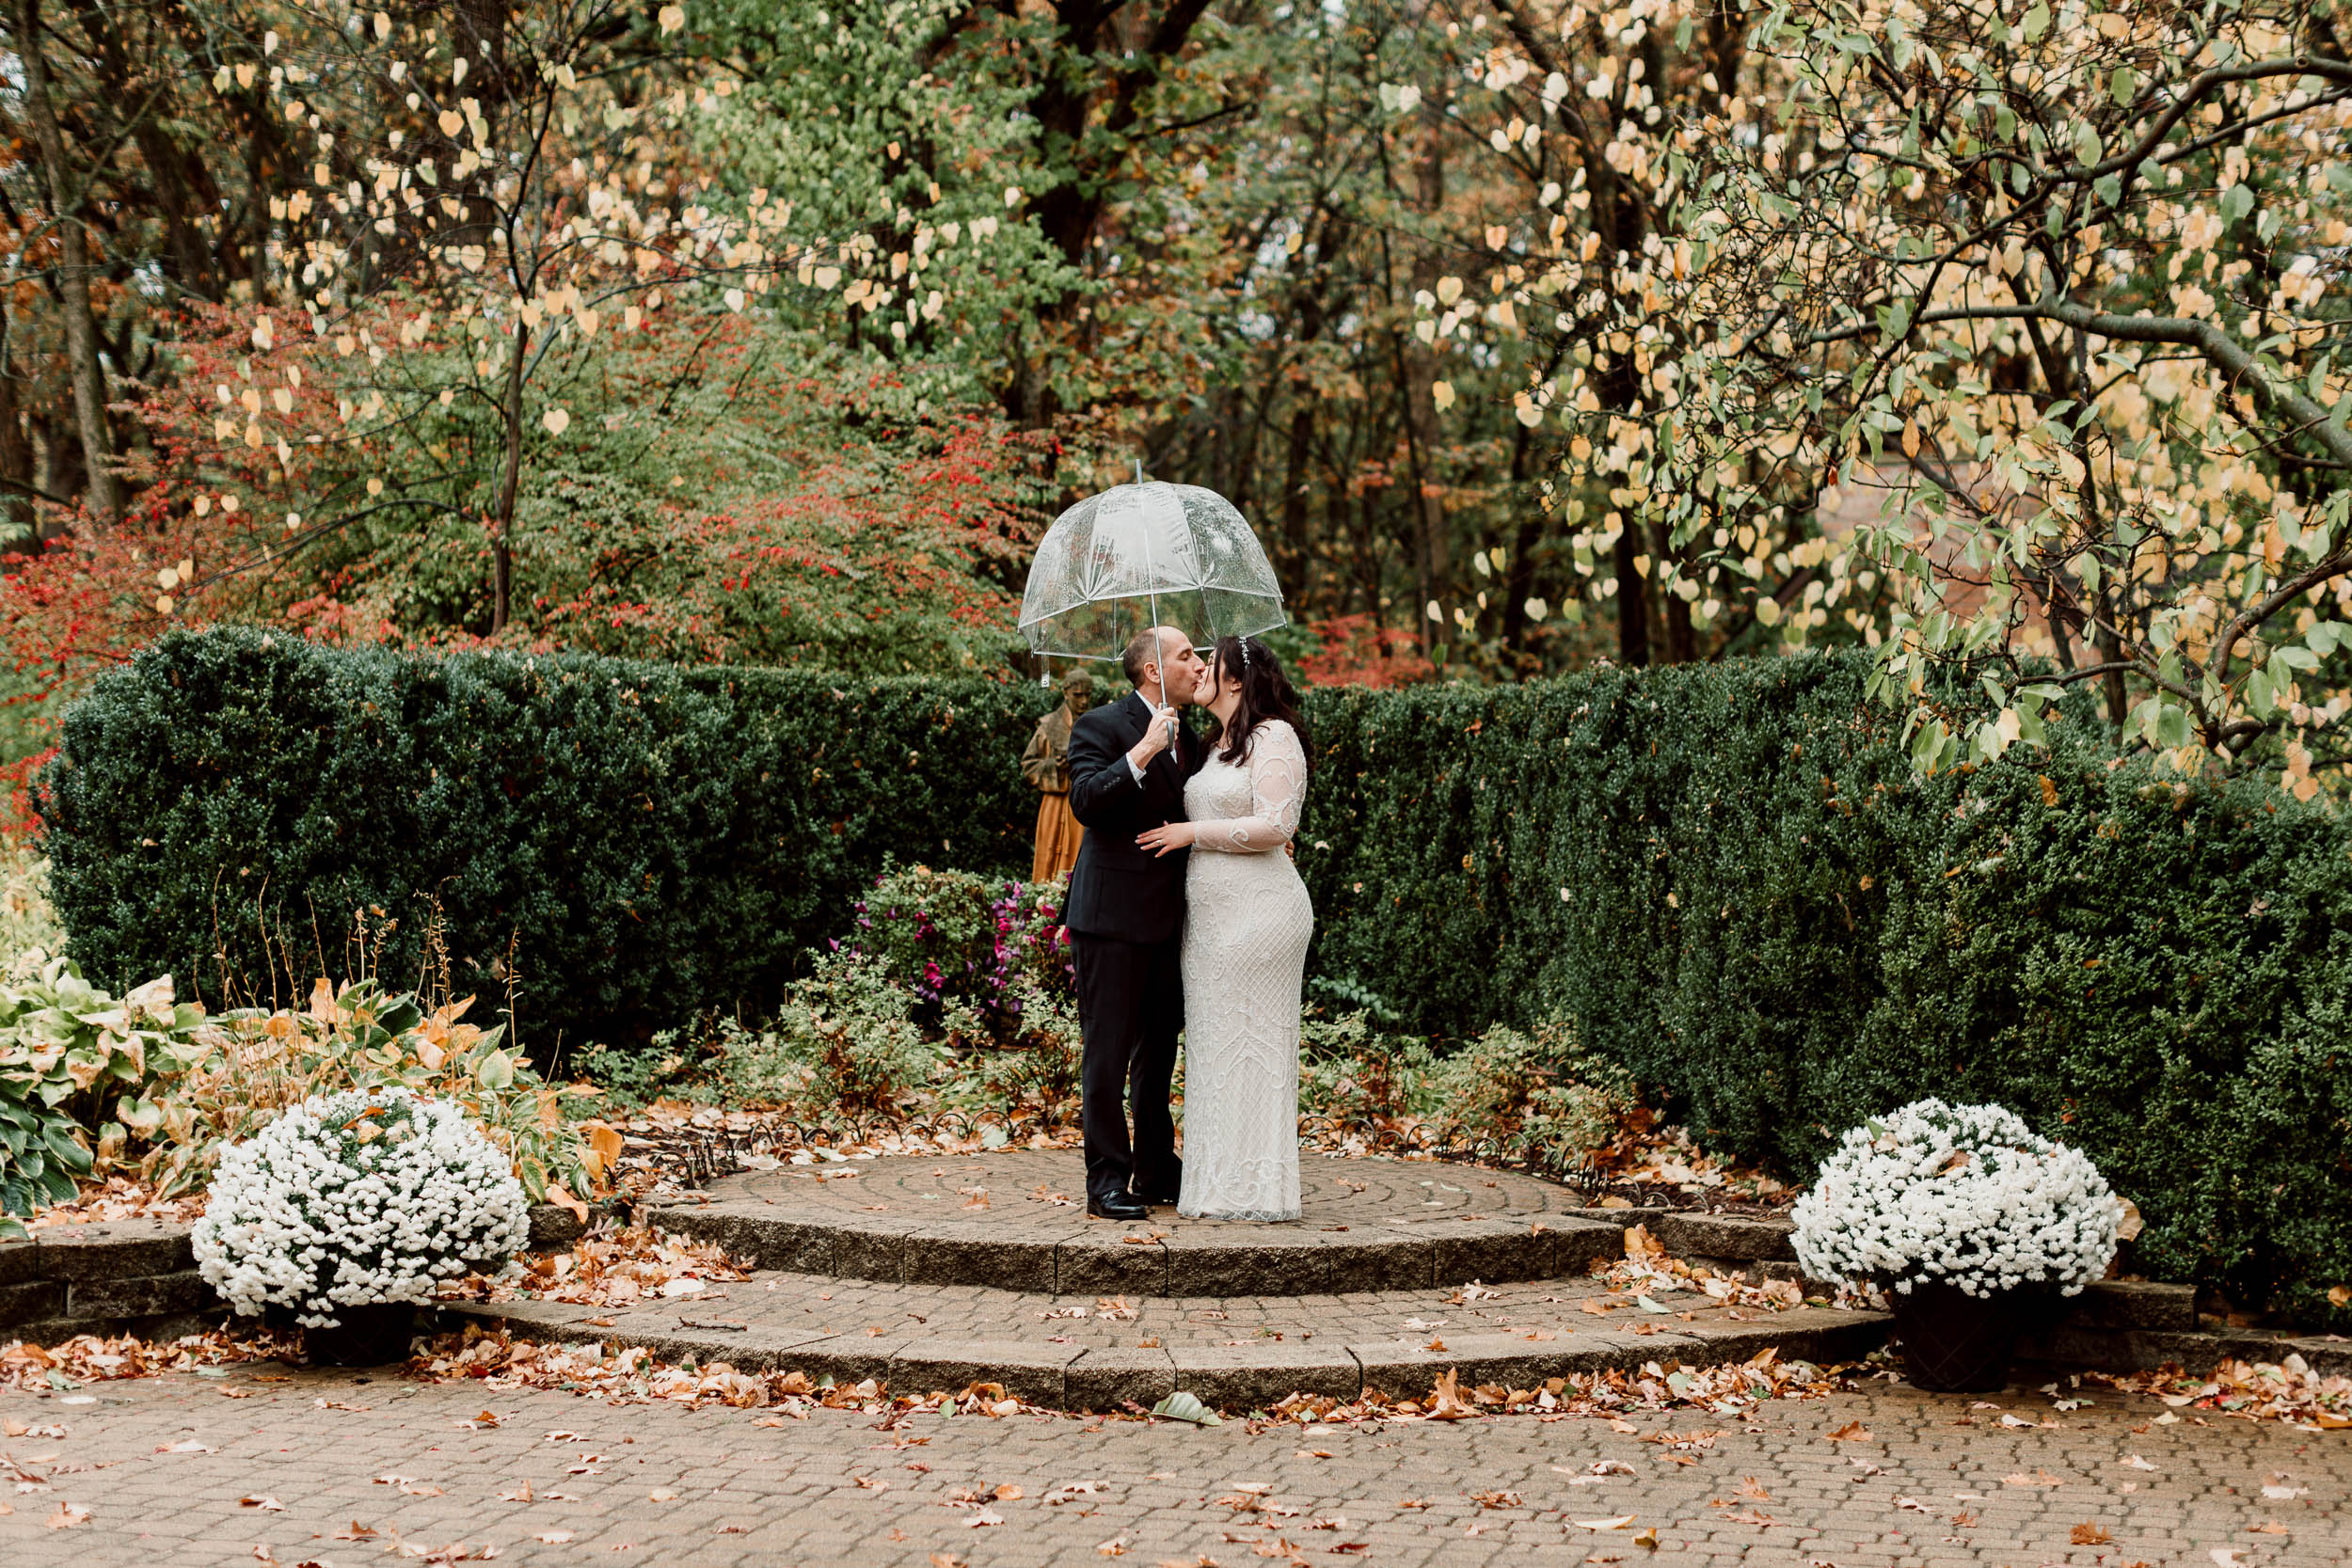 Clear umbrella on a rainy wedding day | 
Intimate Elopement in Palos Park IL | The Wayside Chapel at The Center Wedding | The Center Garden Wedding | Rainy Fall Wedding | Fall Chicago Wedding | Elopement Photographer Chicago